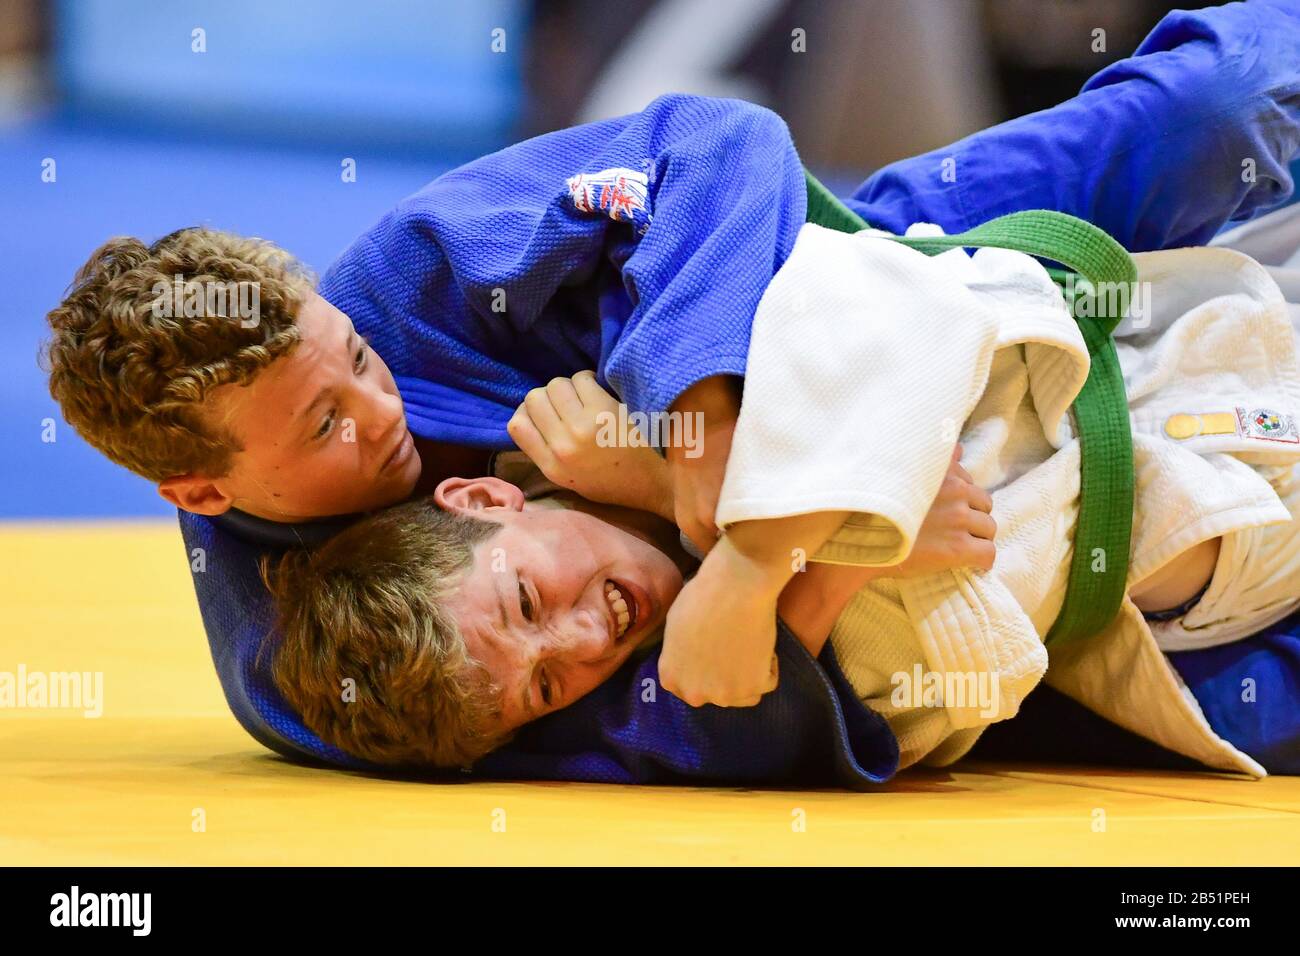 William Zollinger of Budokan (Right) in action against Coby Debrincat of Innisfail Judo Club in the Cadet Men U50kg category of the 2020 Sydney International held at Quaycentre, Sydney Olympic Park.  Zollinger won the match. Stock Photo